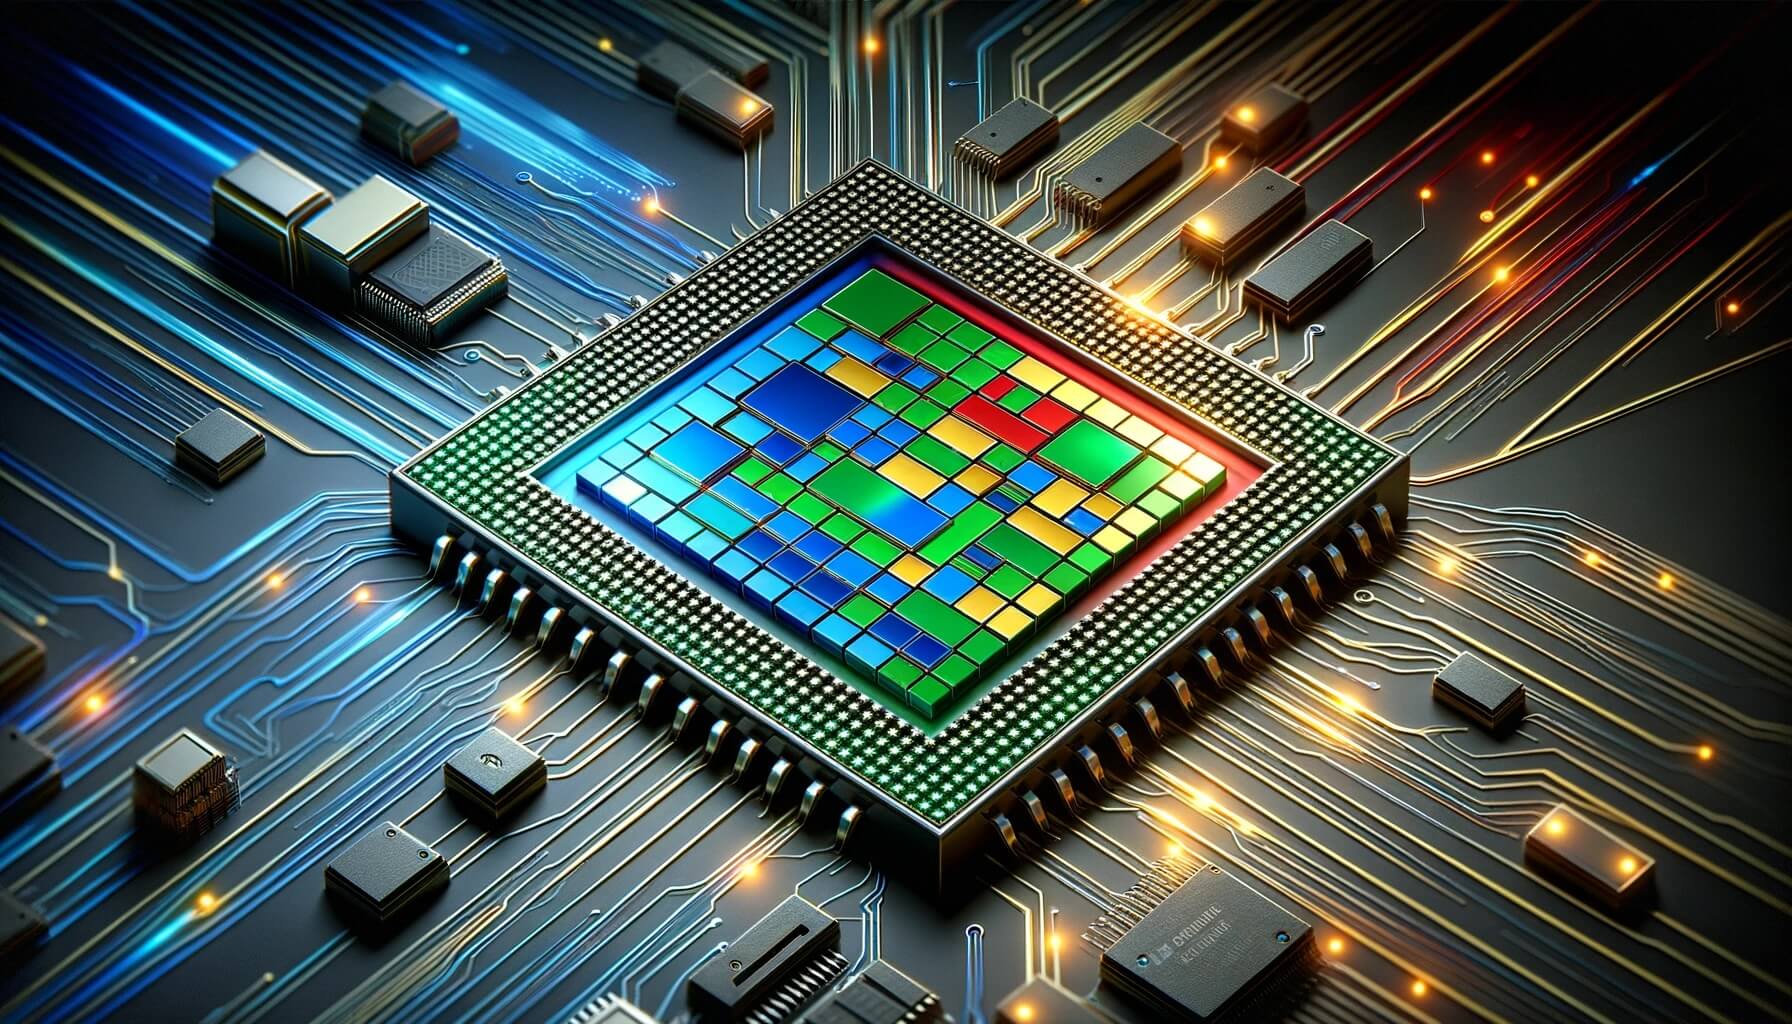 Microsoft unveils new AI chip Maia in collaboration with OpenAI